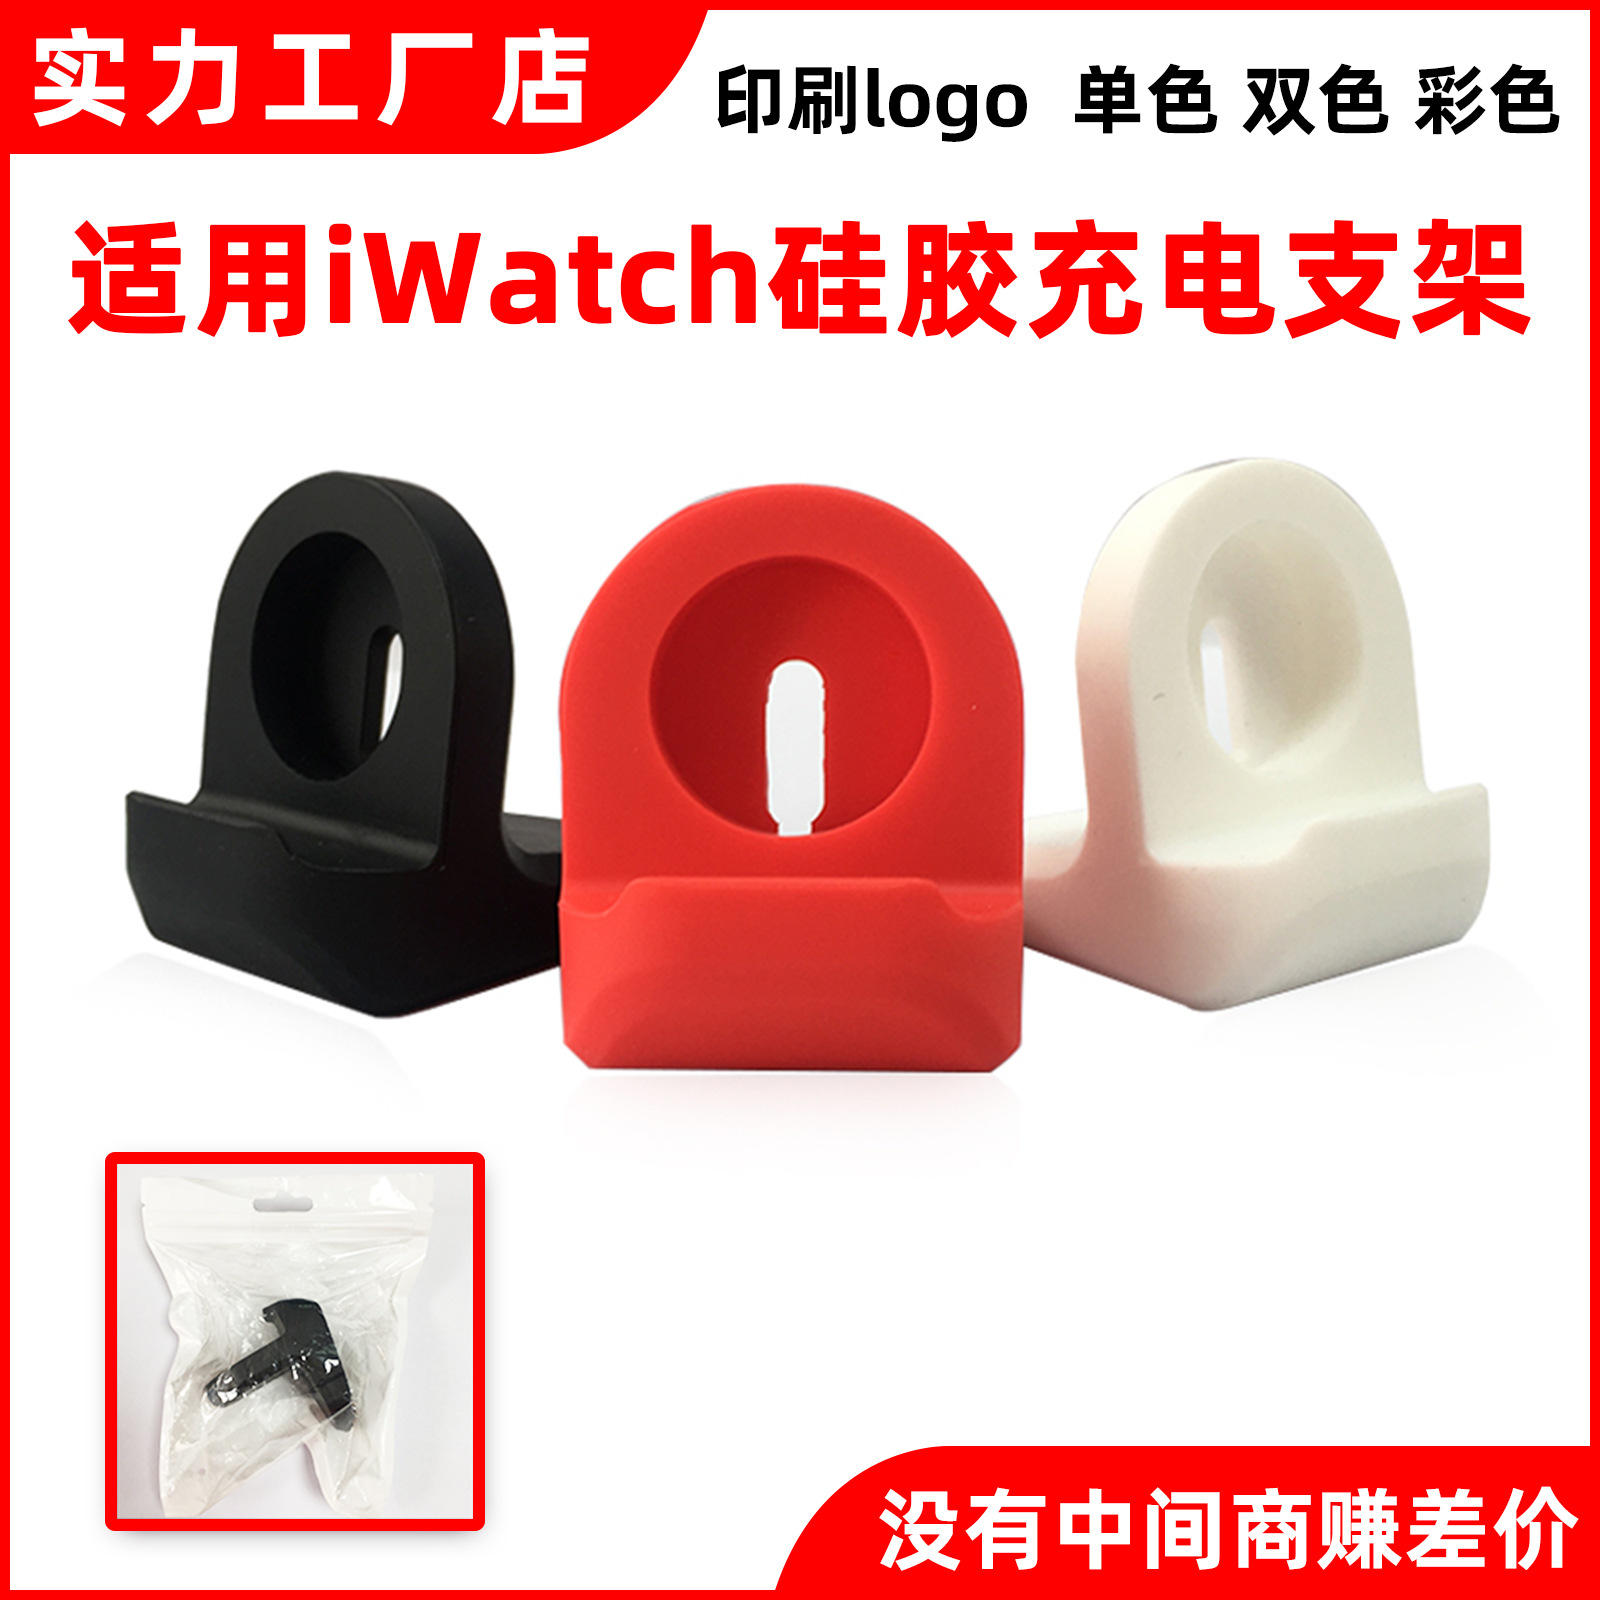 Suitable for iWatch watch stand Rainbow...